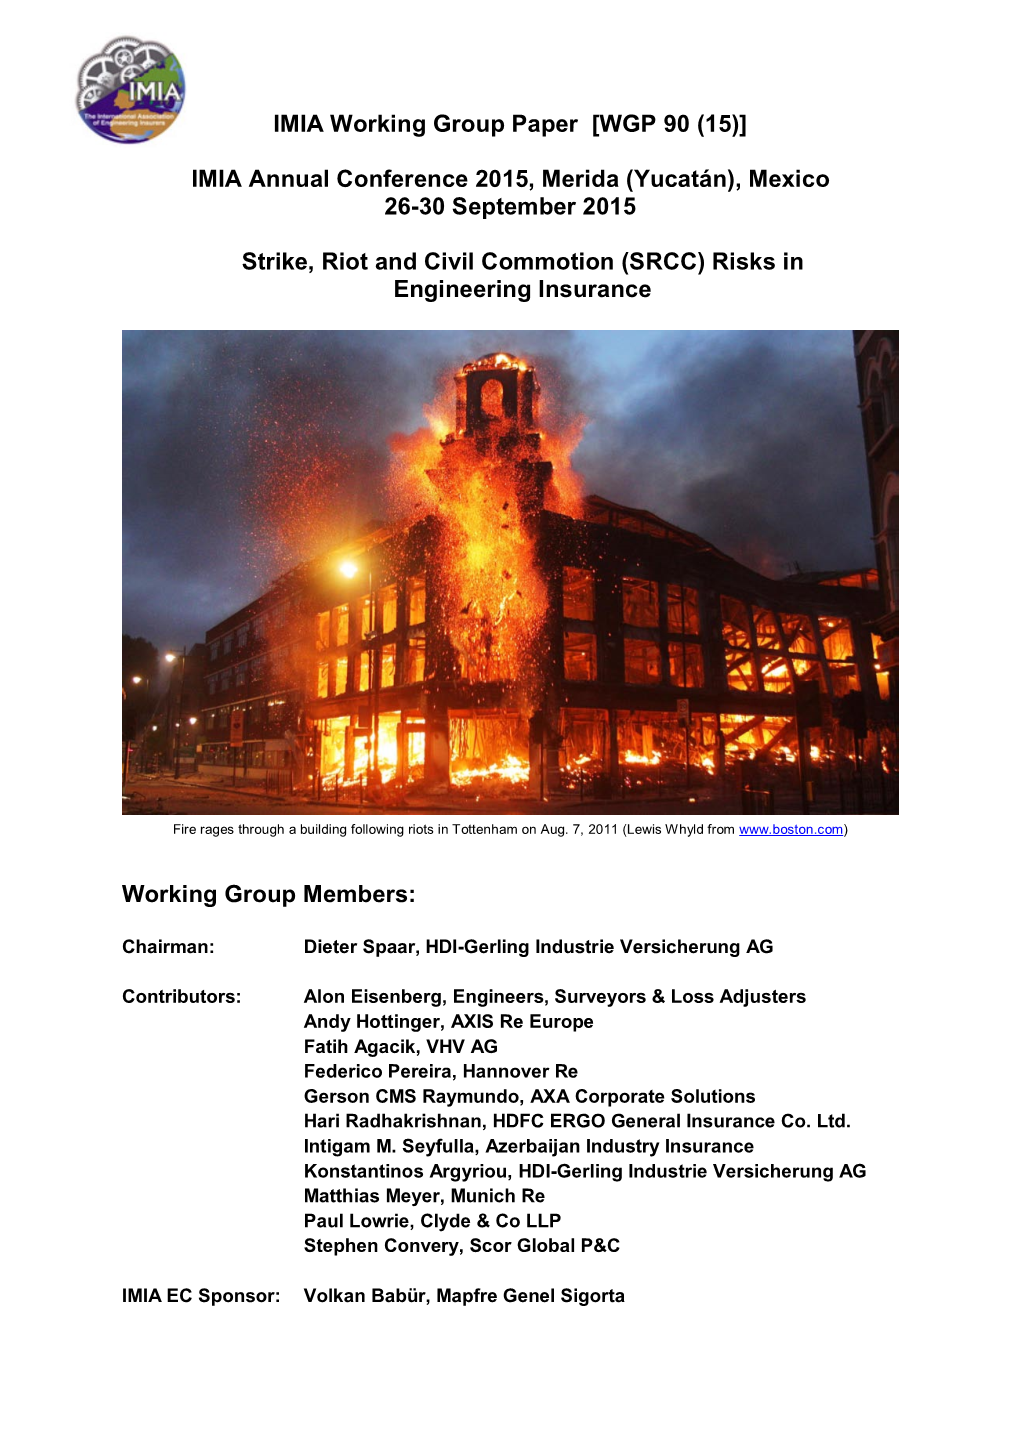 SRCC) Risks in Engineering Insurance